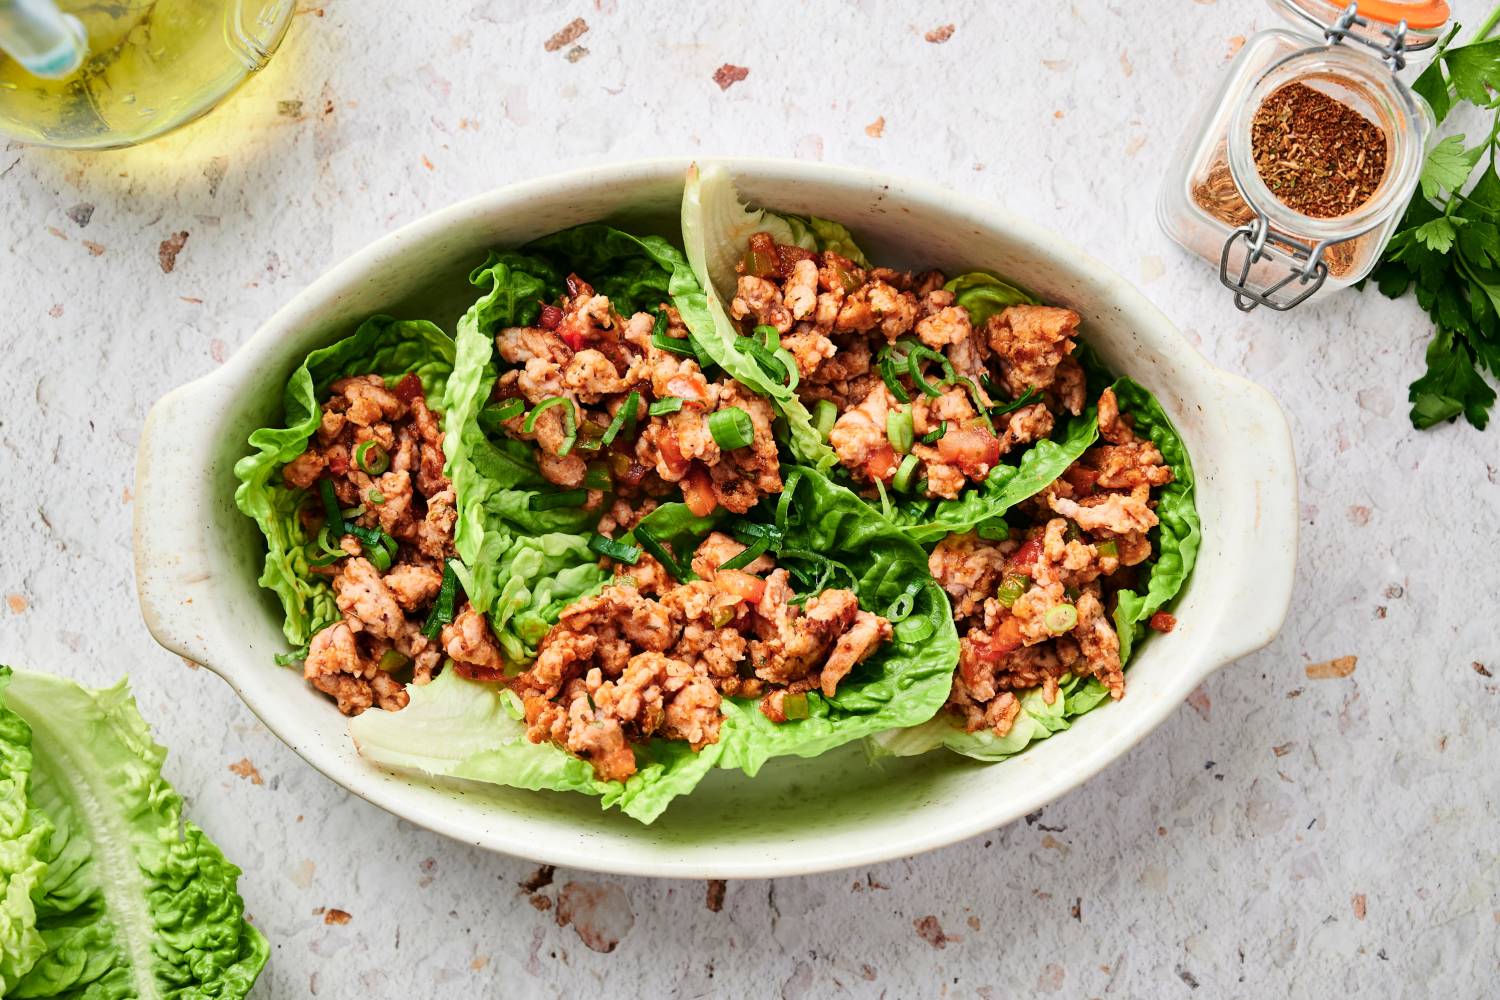 Turkey taco lettuce wraps with tomatoes, shredded cheese, ground turkey, and avocado. 